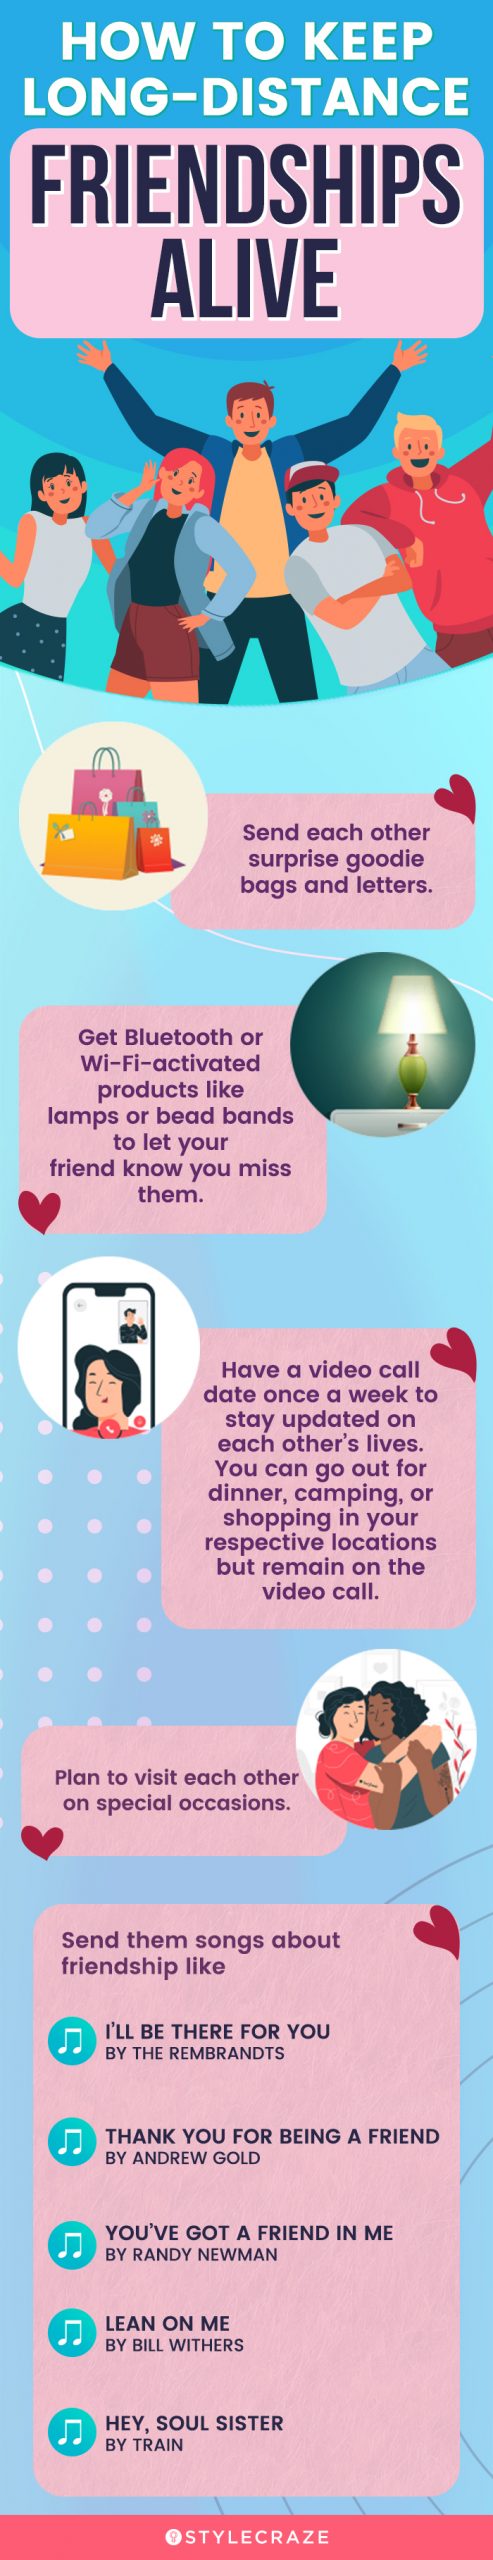 how to keep long distance friendships alive (infographic)